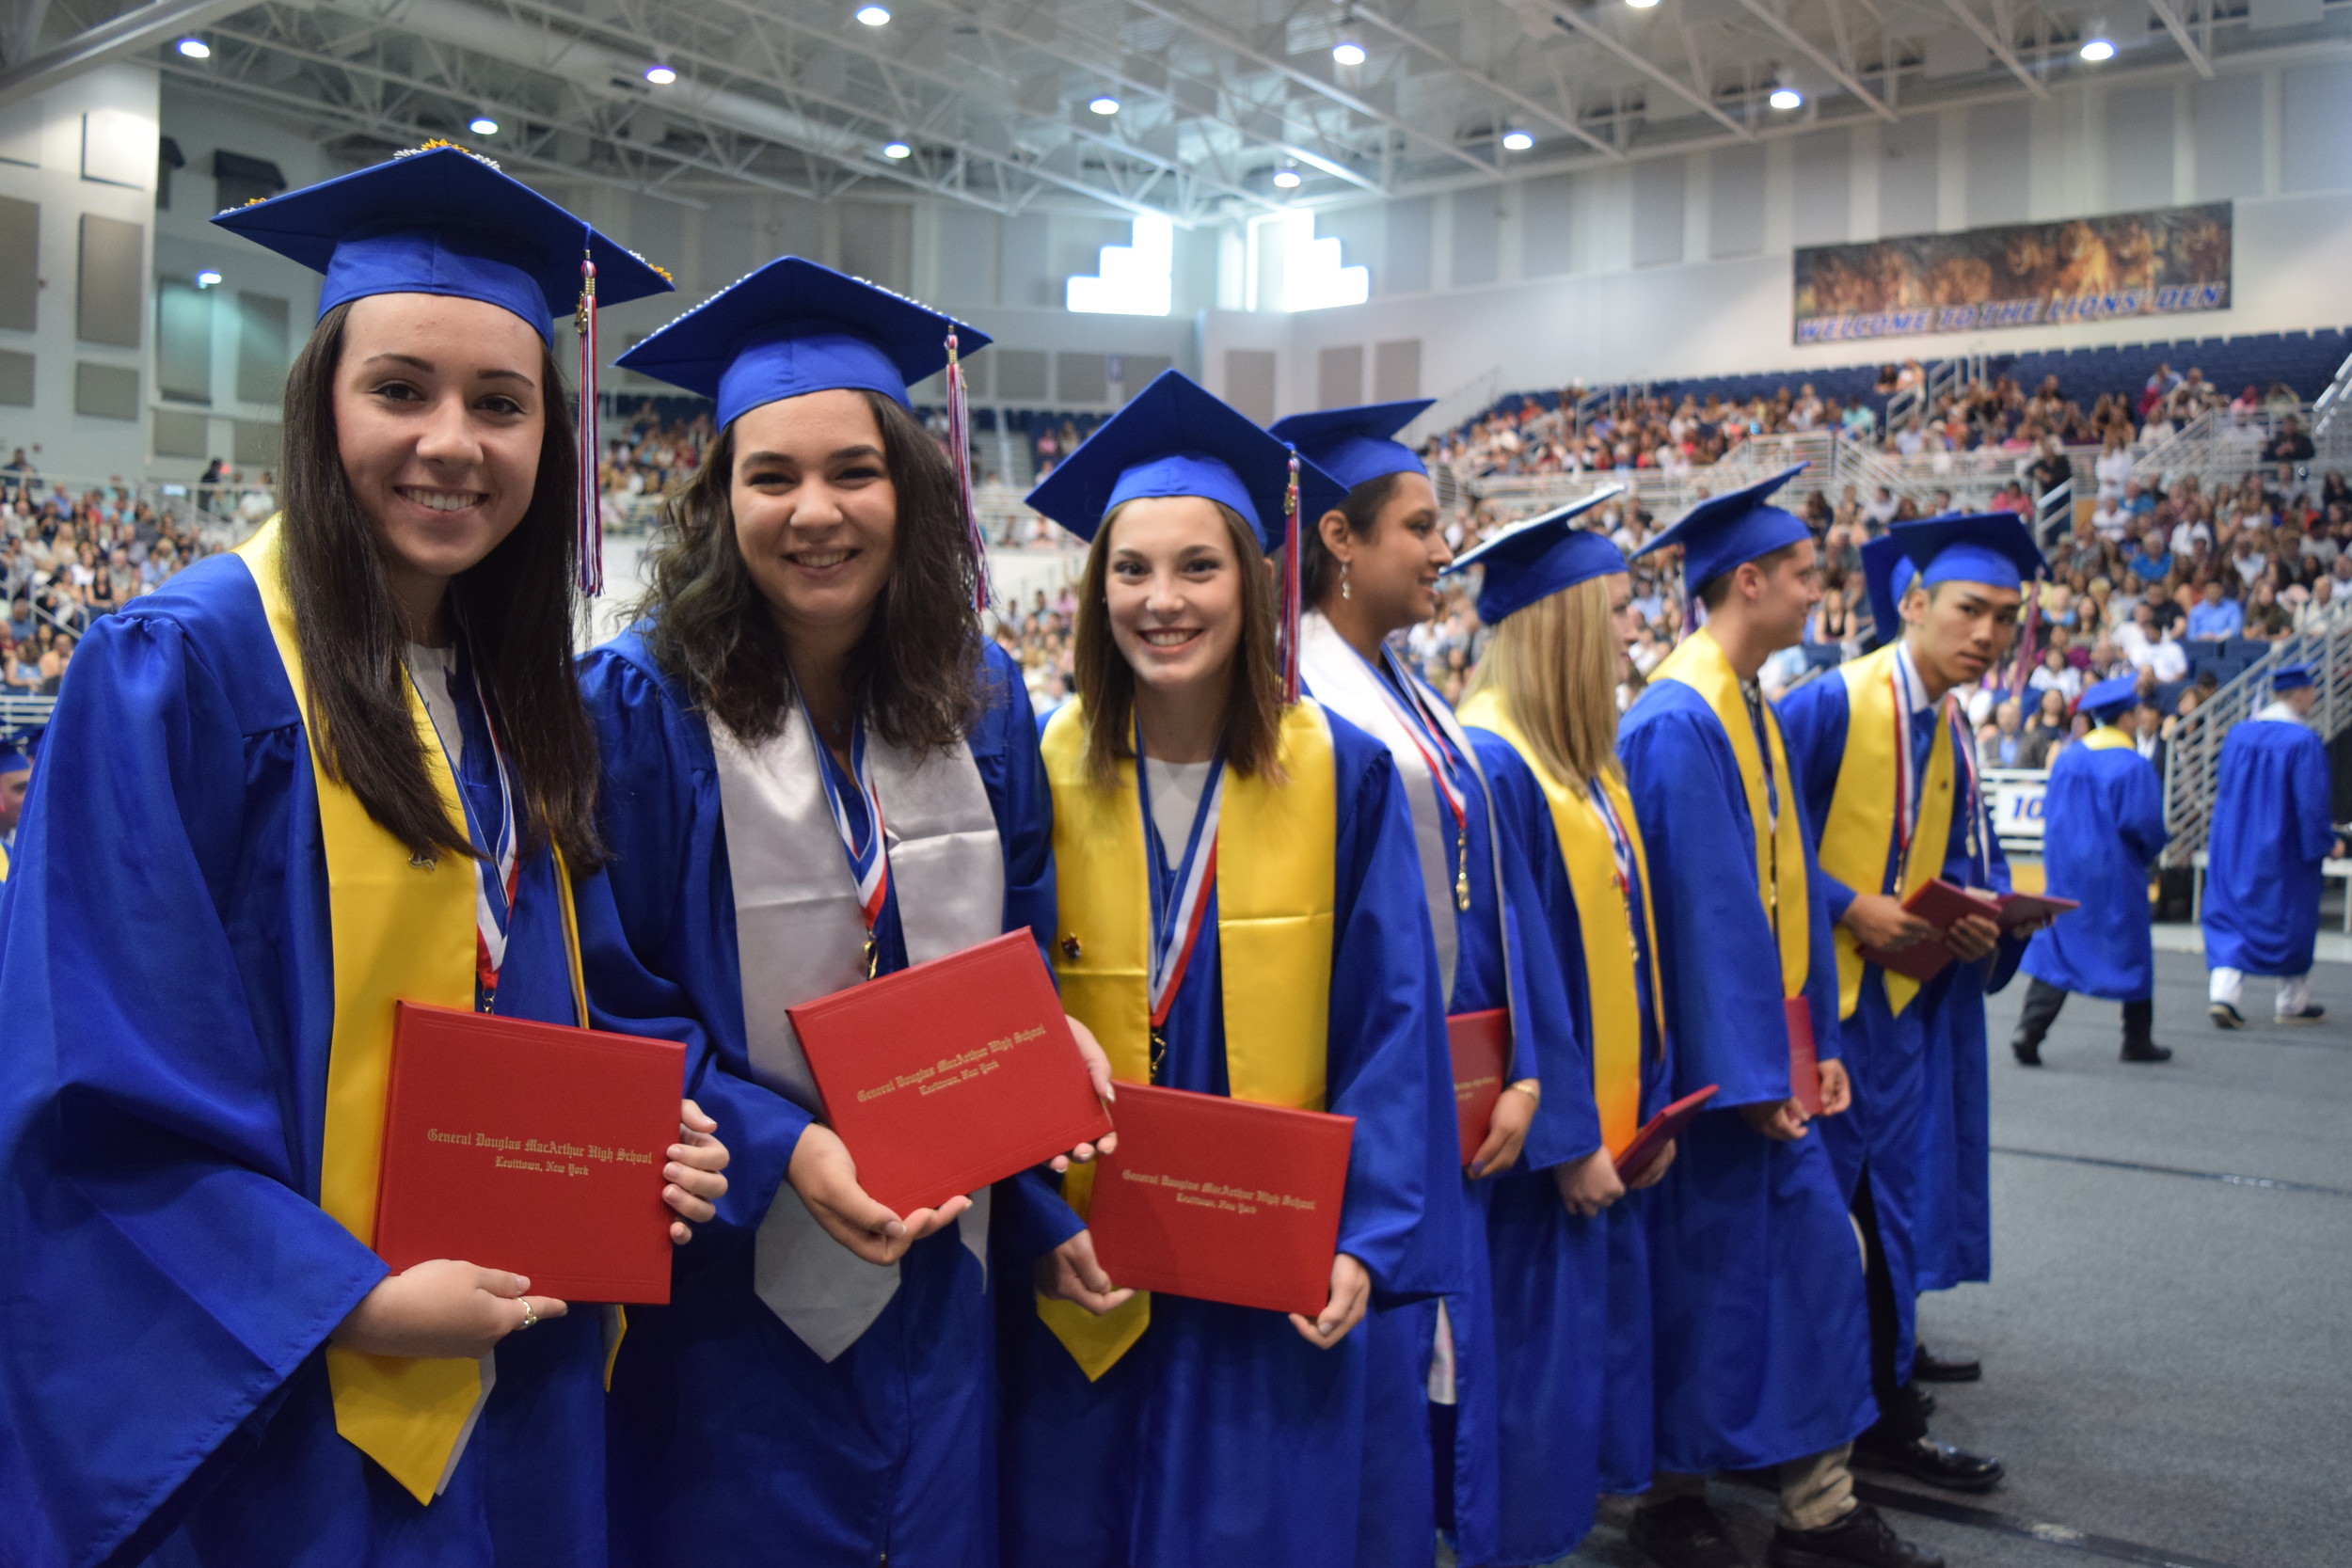 It was an exciting day for MacArthur High School’s nearly 330 graduates, who received their diplomas in a morning ceremony at Hofstra University last Saturday.